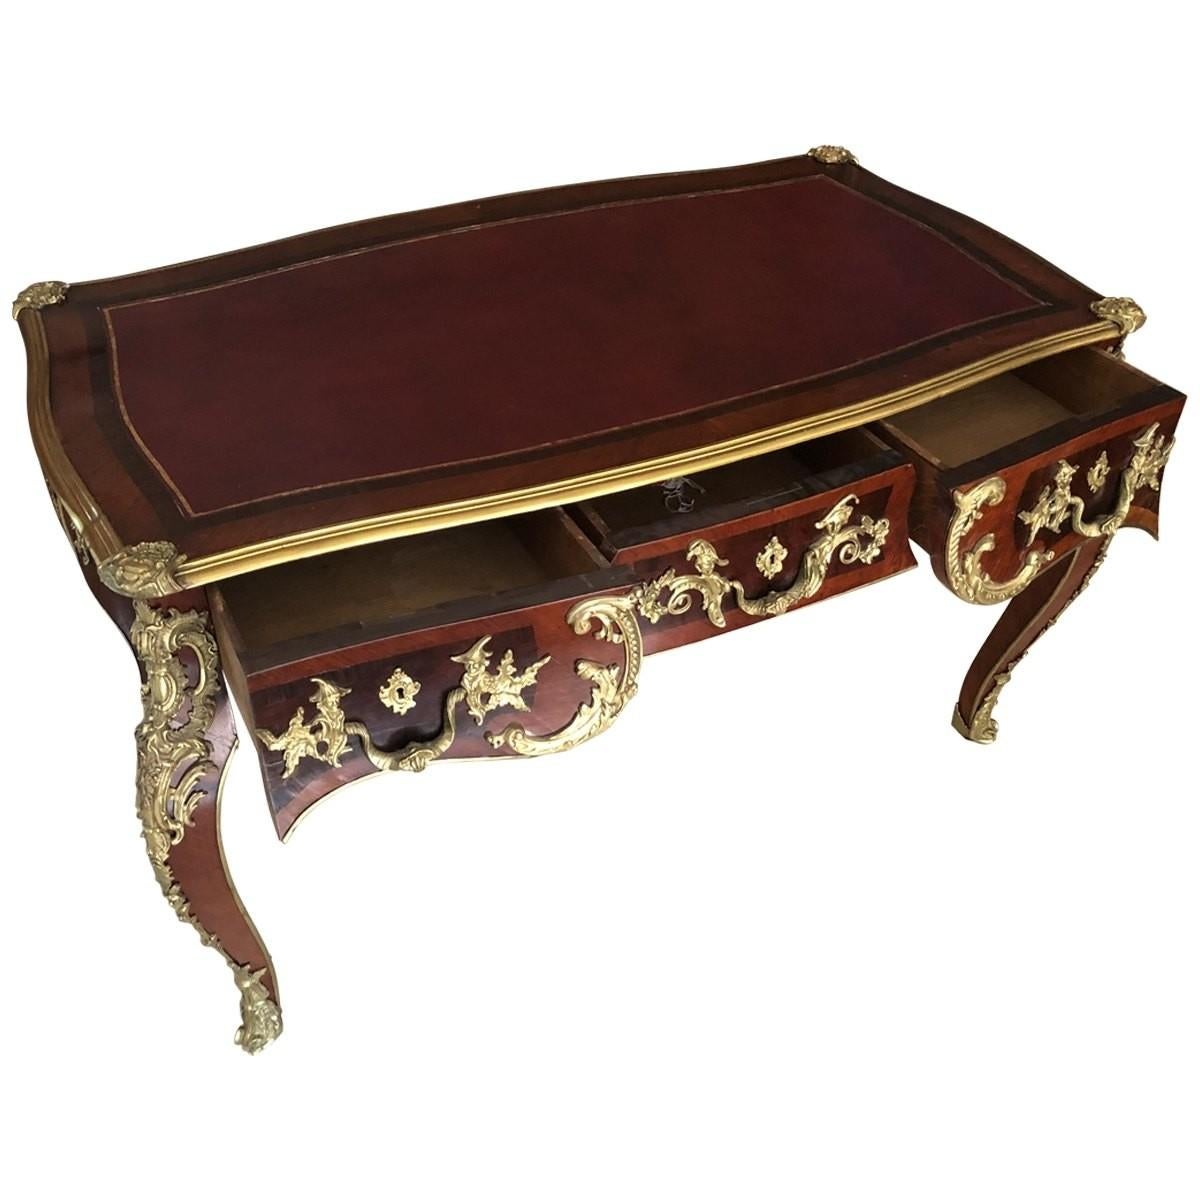 19th century opulent desk. Gilt bronze mounts and parquetry inlay decorate the desk to an air of old-world style. Features cabriole legs, three drawers, and a burgundy leather inset top.
Materials: Leather, bronze, Kingwood.
Dimensions:
Width